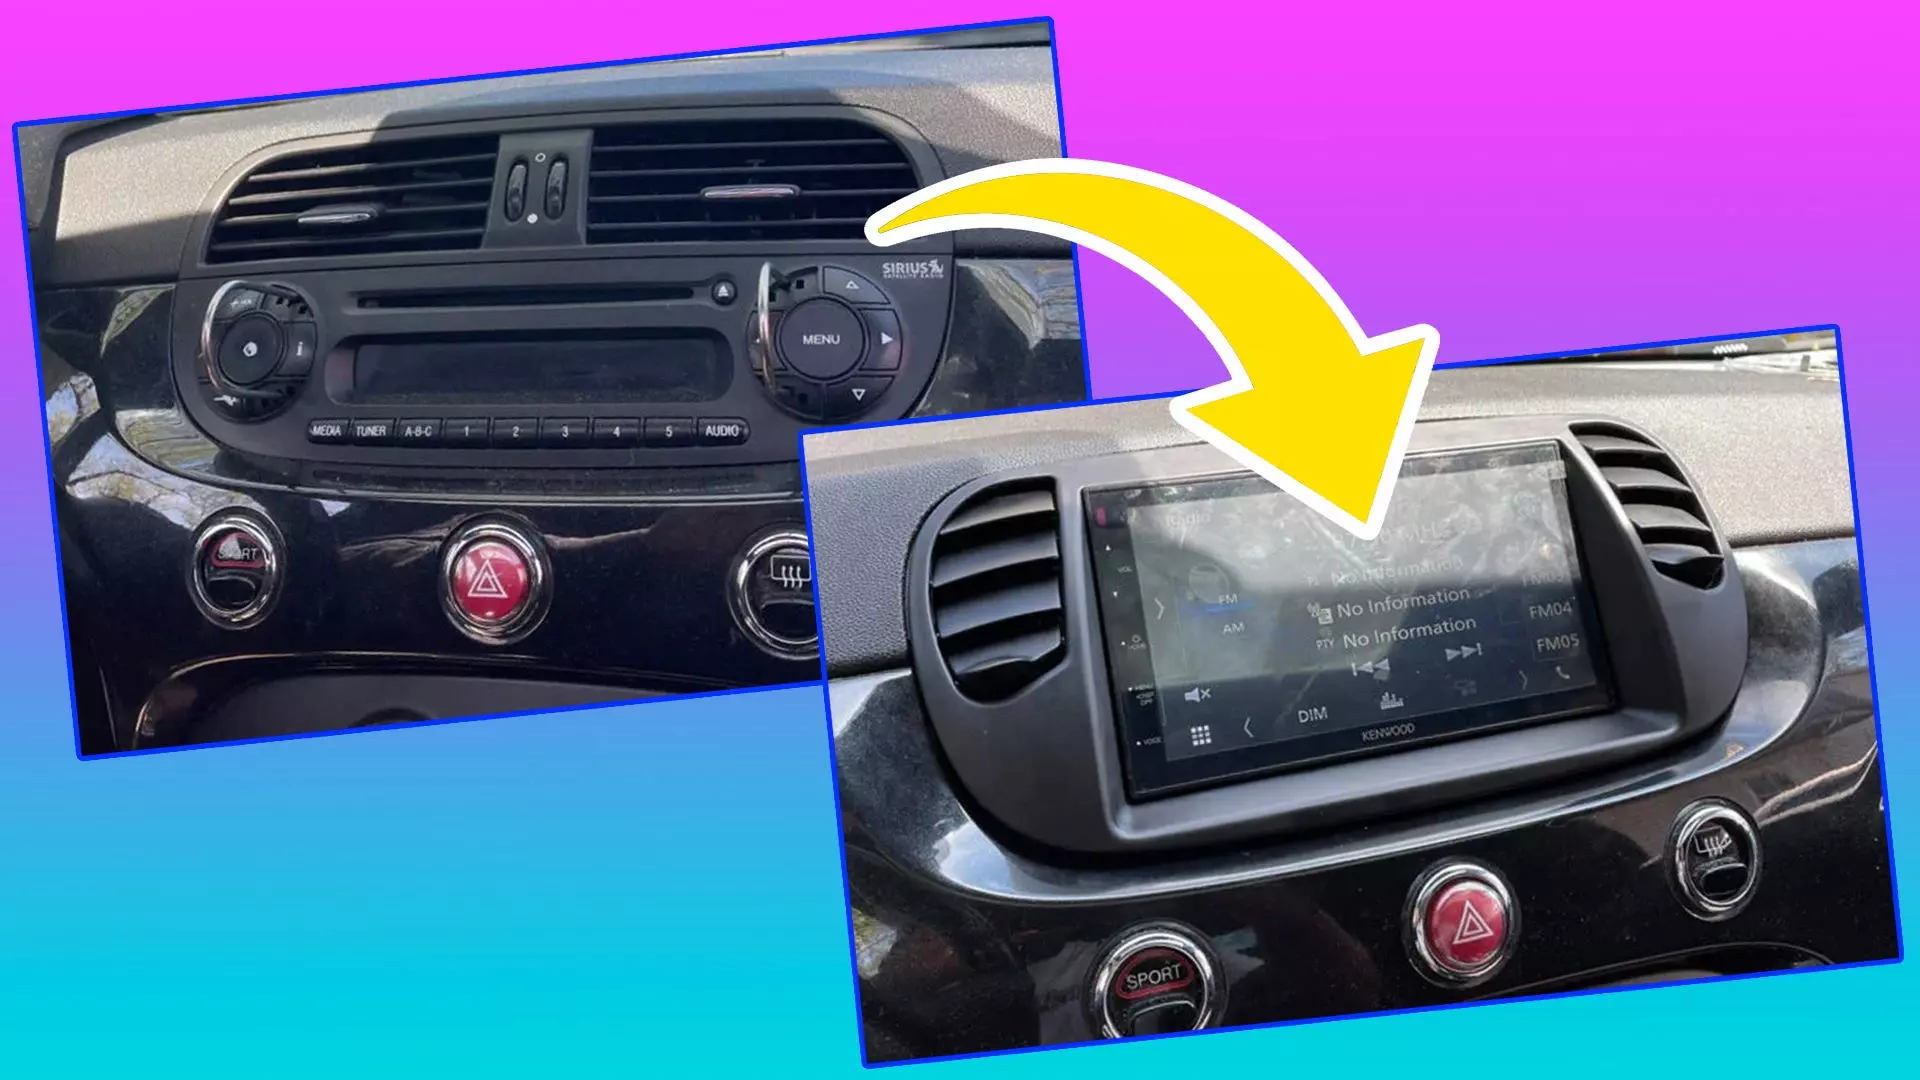 Installing a Double-DIN Screen in a Car With a Single-DIN Radio Slot Was a Big Pain but Worth It